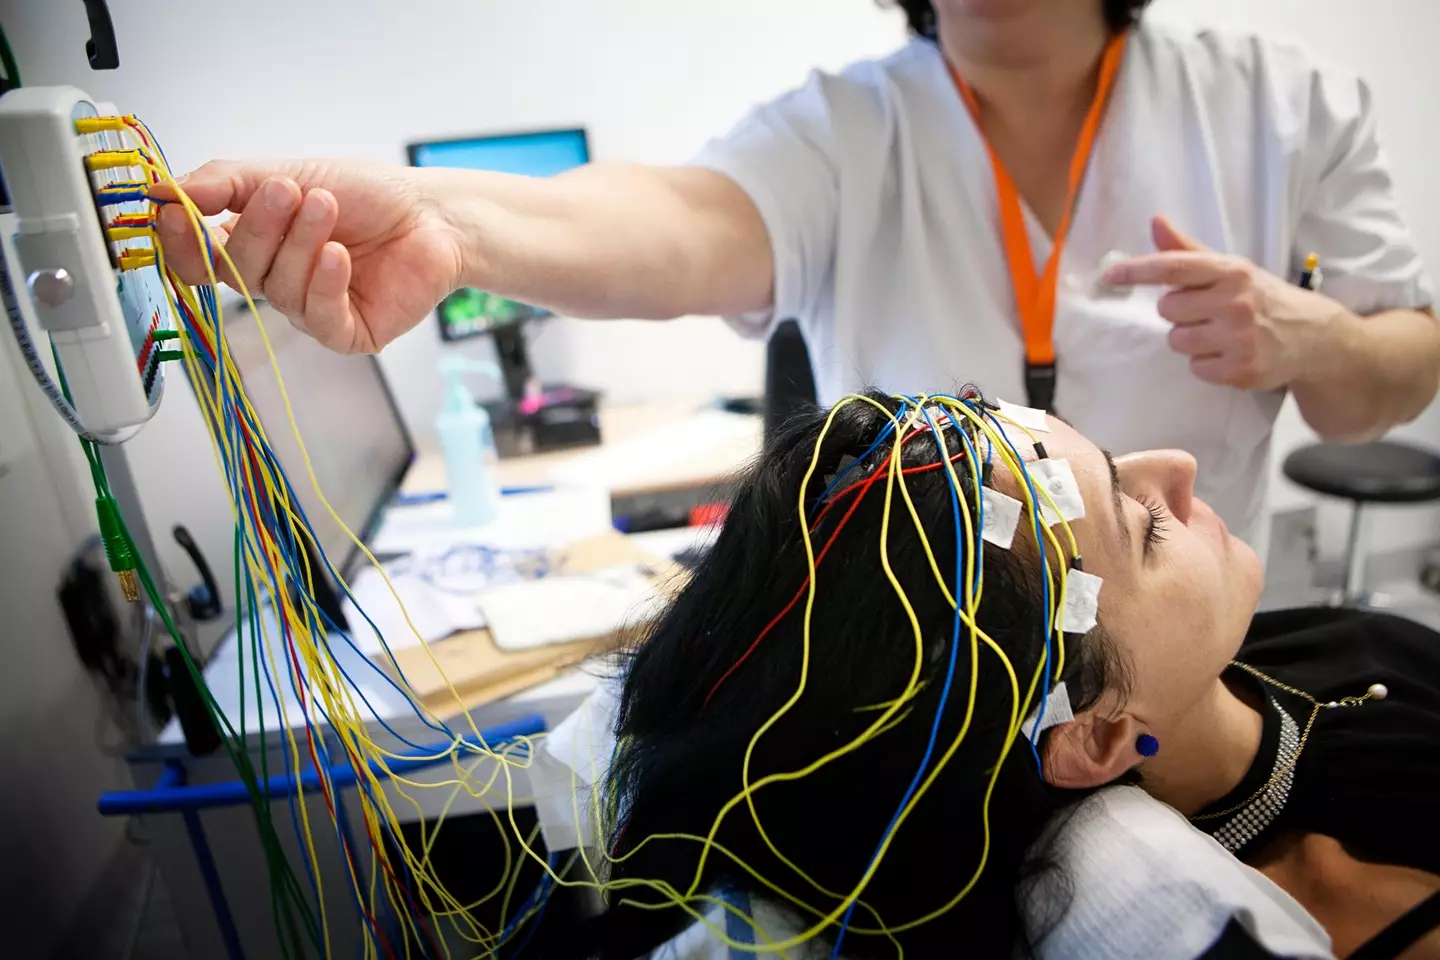 Continuous electroencephalogram (cEEG) monitoring was used on the patient.